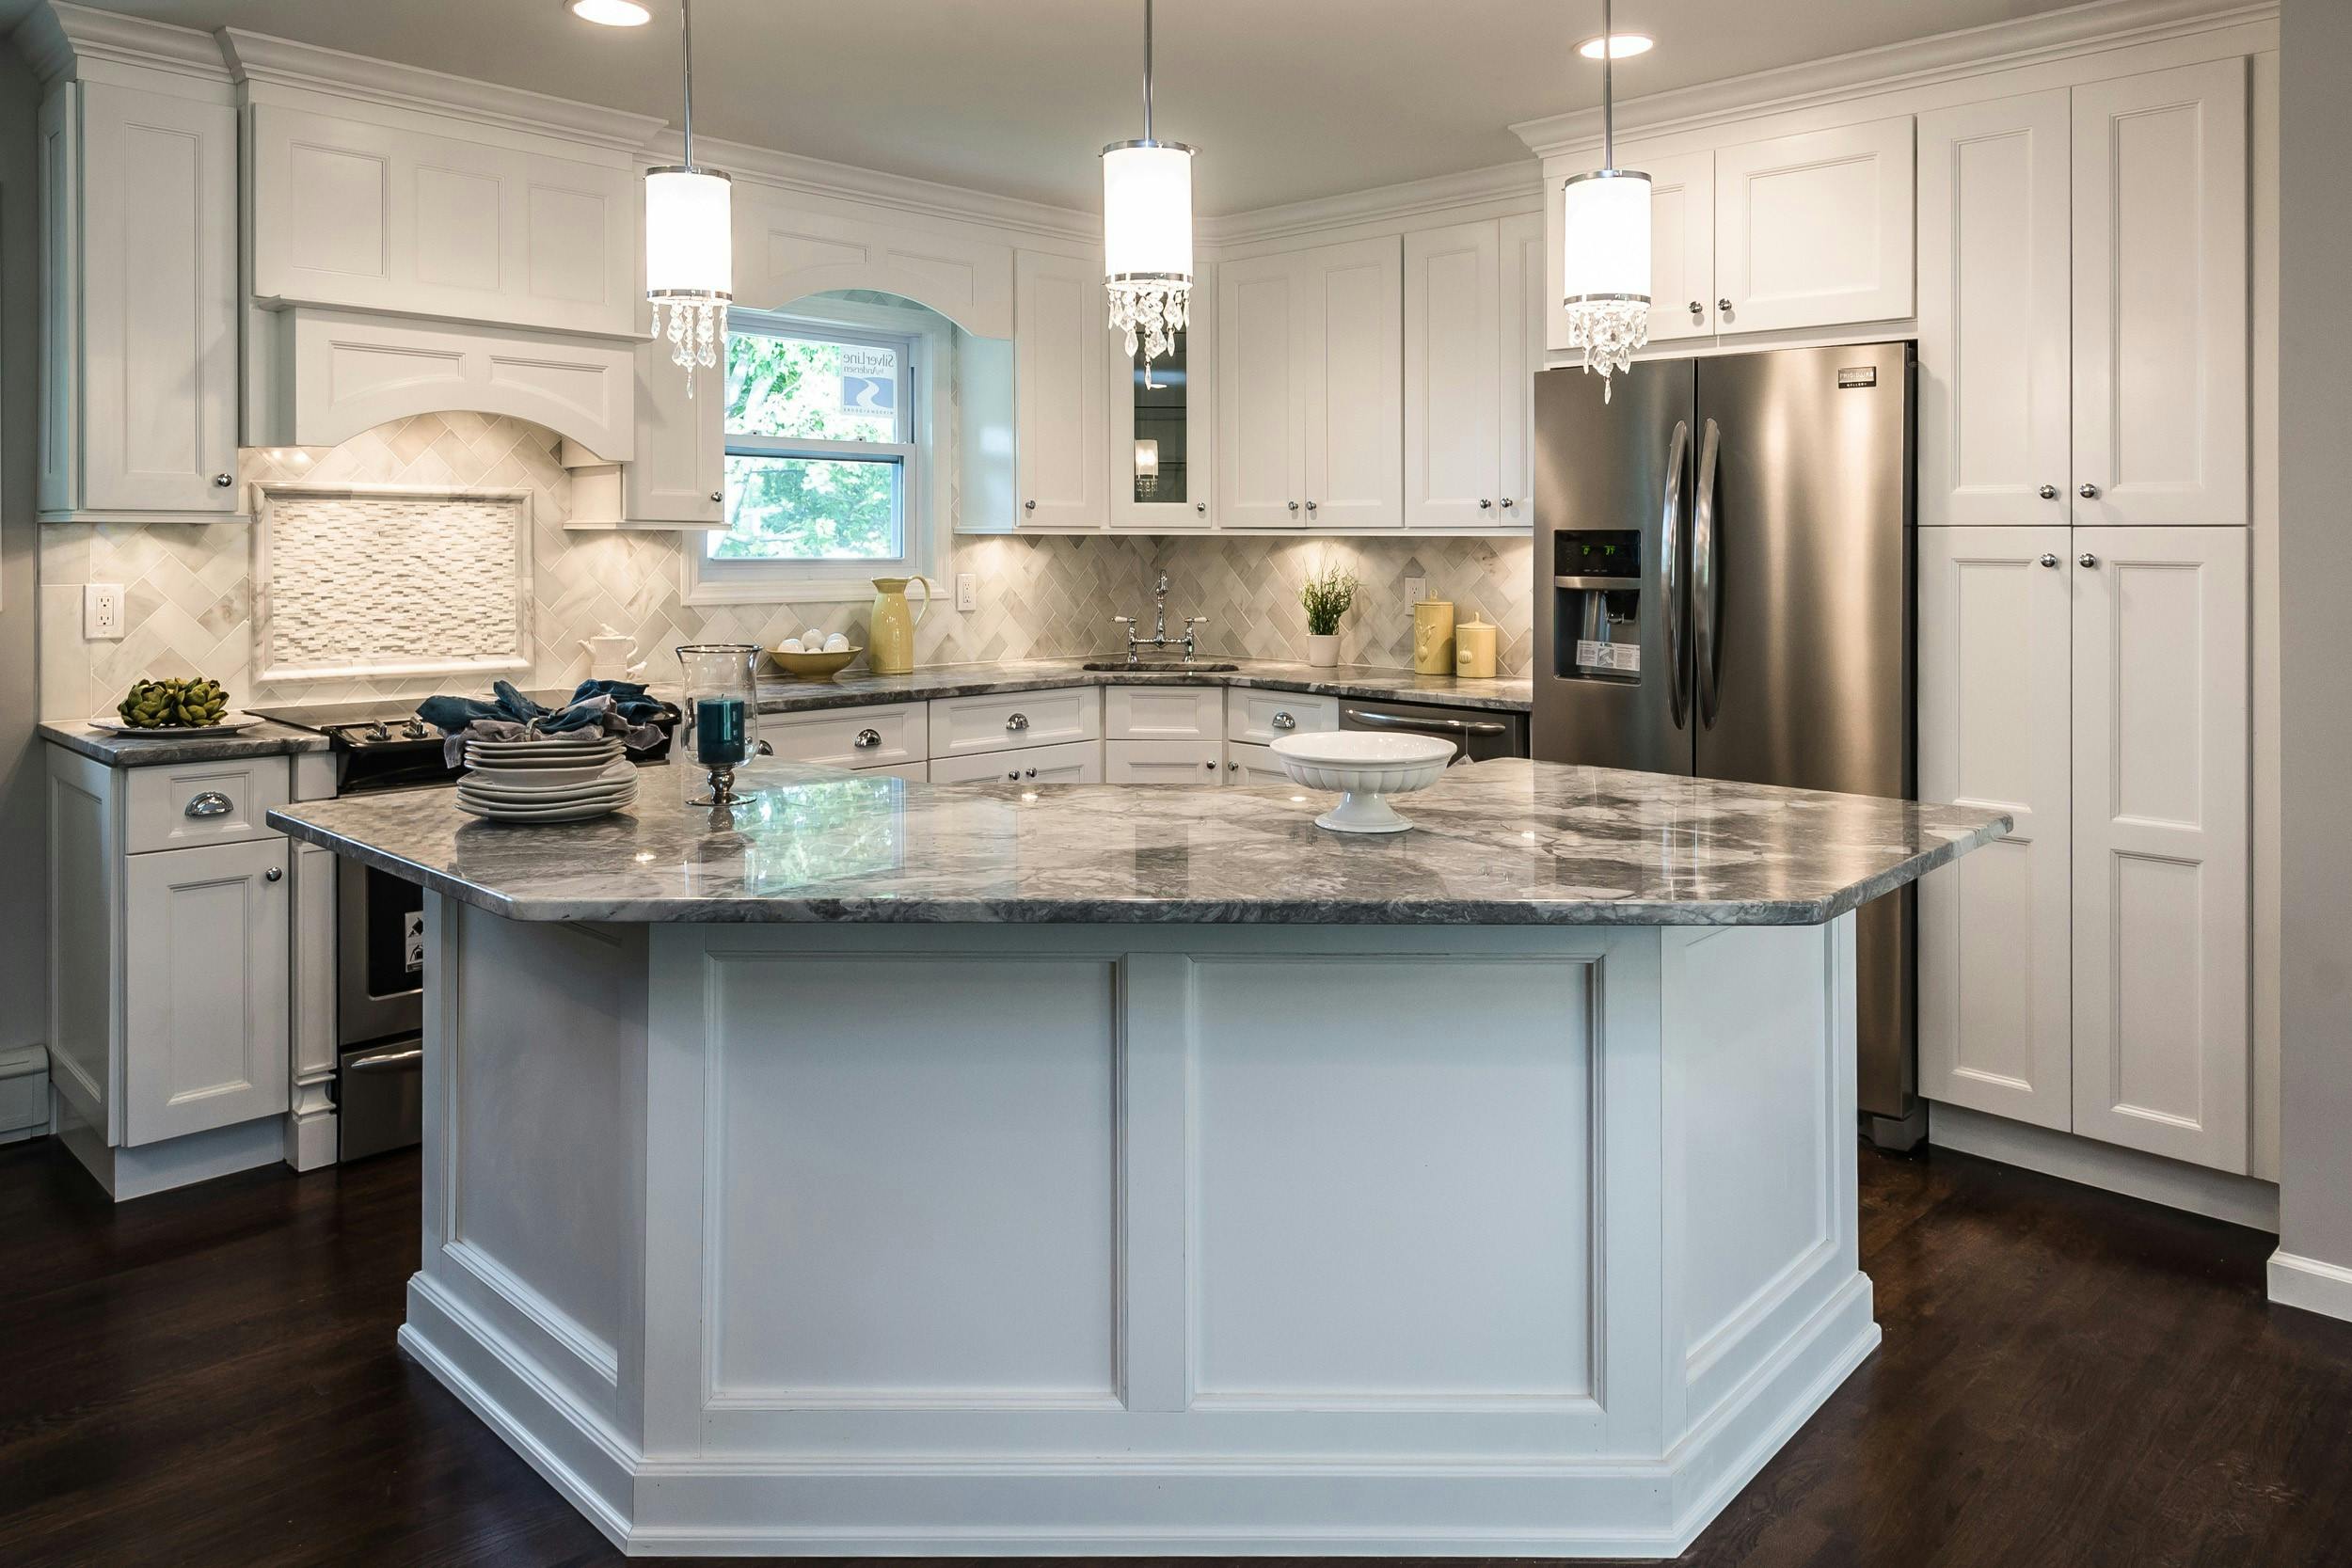 Kitchen Countertops And Cabinets, How To Coordinate Cabinets Countertops And Flooring